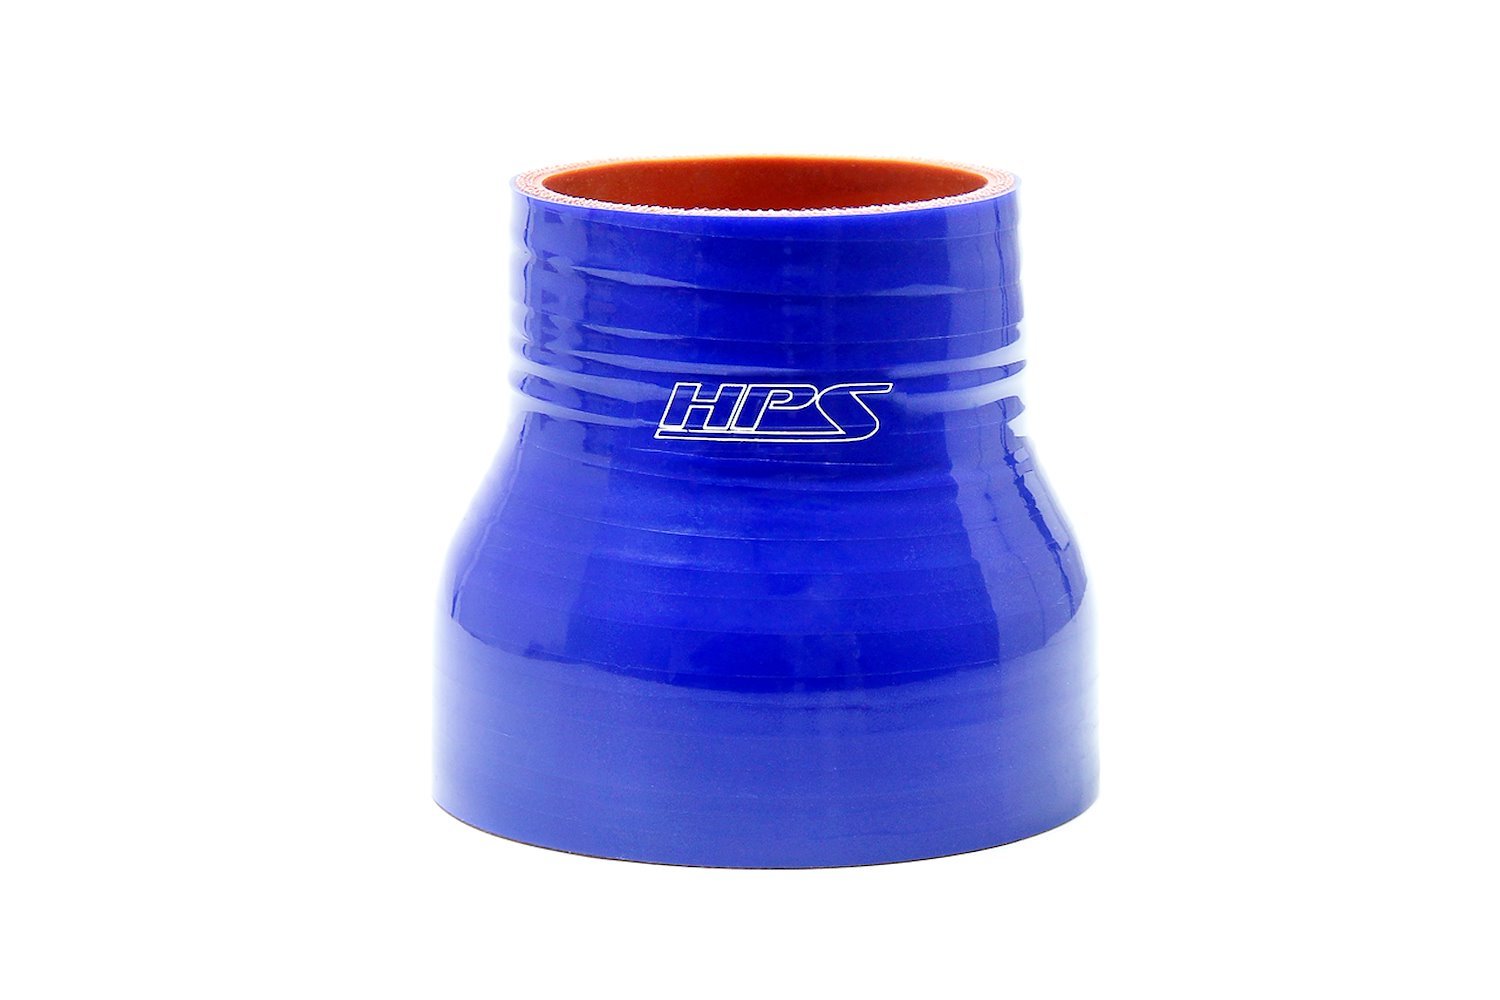 HTSR-225-250-BLUE Silicone Reducer Hose, High-Temp 4-Ply Reinforced, 2-1/4 in. - 2-1/2 in. ID, 3 in. Long, Blue